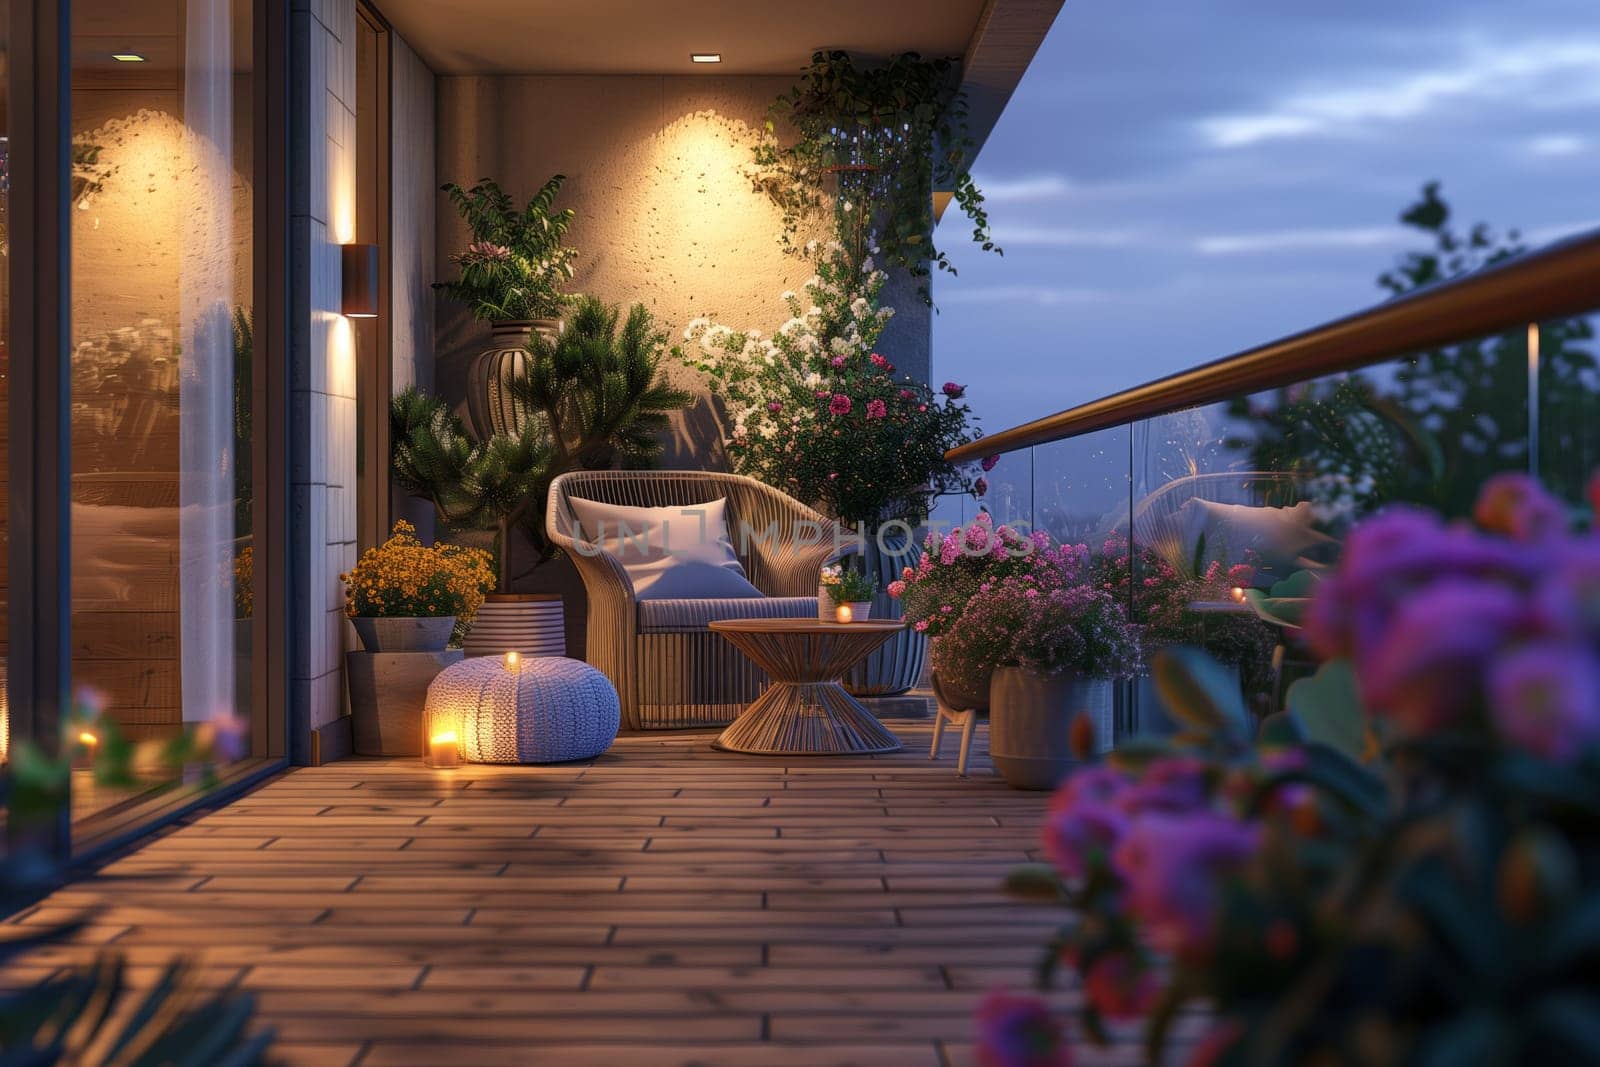 A cozy balcony with a wooden chair and table, surrounded by potted plants, flowers, and a view of the sky and nearby buildings